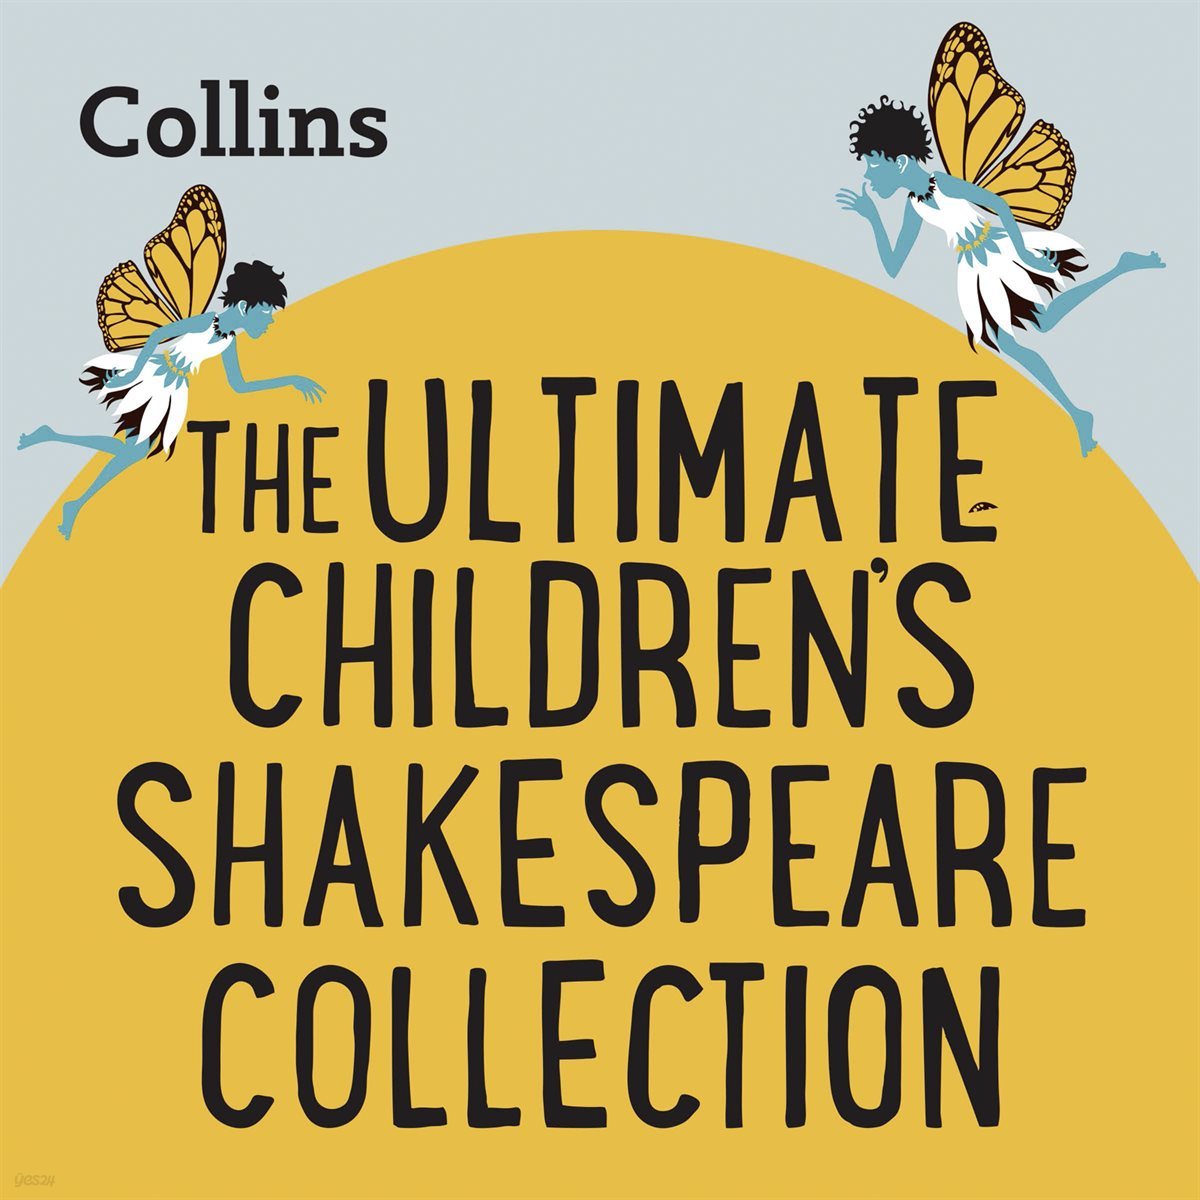 [UK Eng] THE ULTIMATE CHILDREN’S SHAKESPEARE COLLECTION: For ages 7-11 -Collins